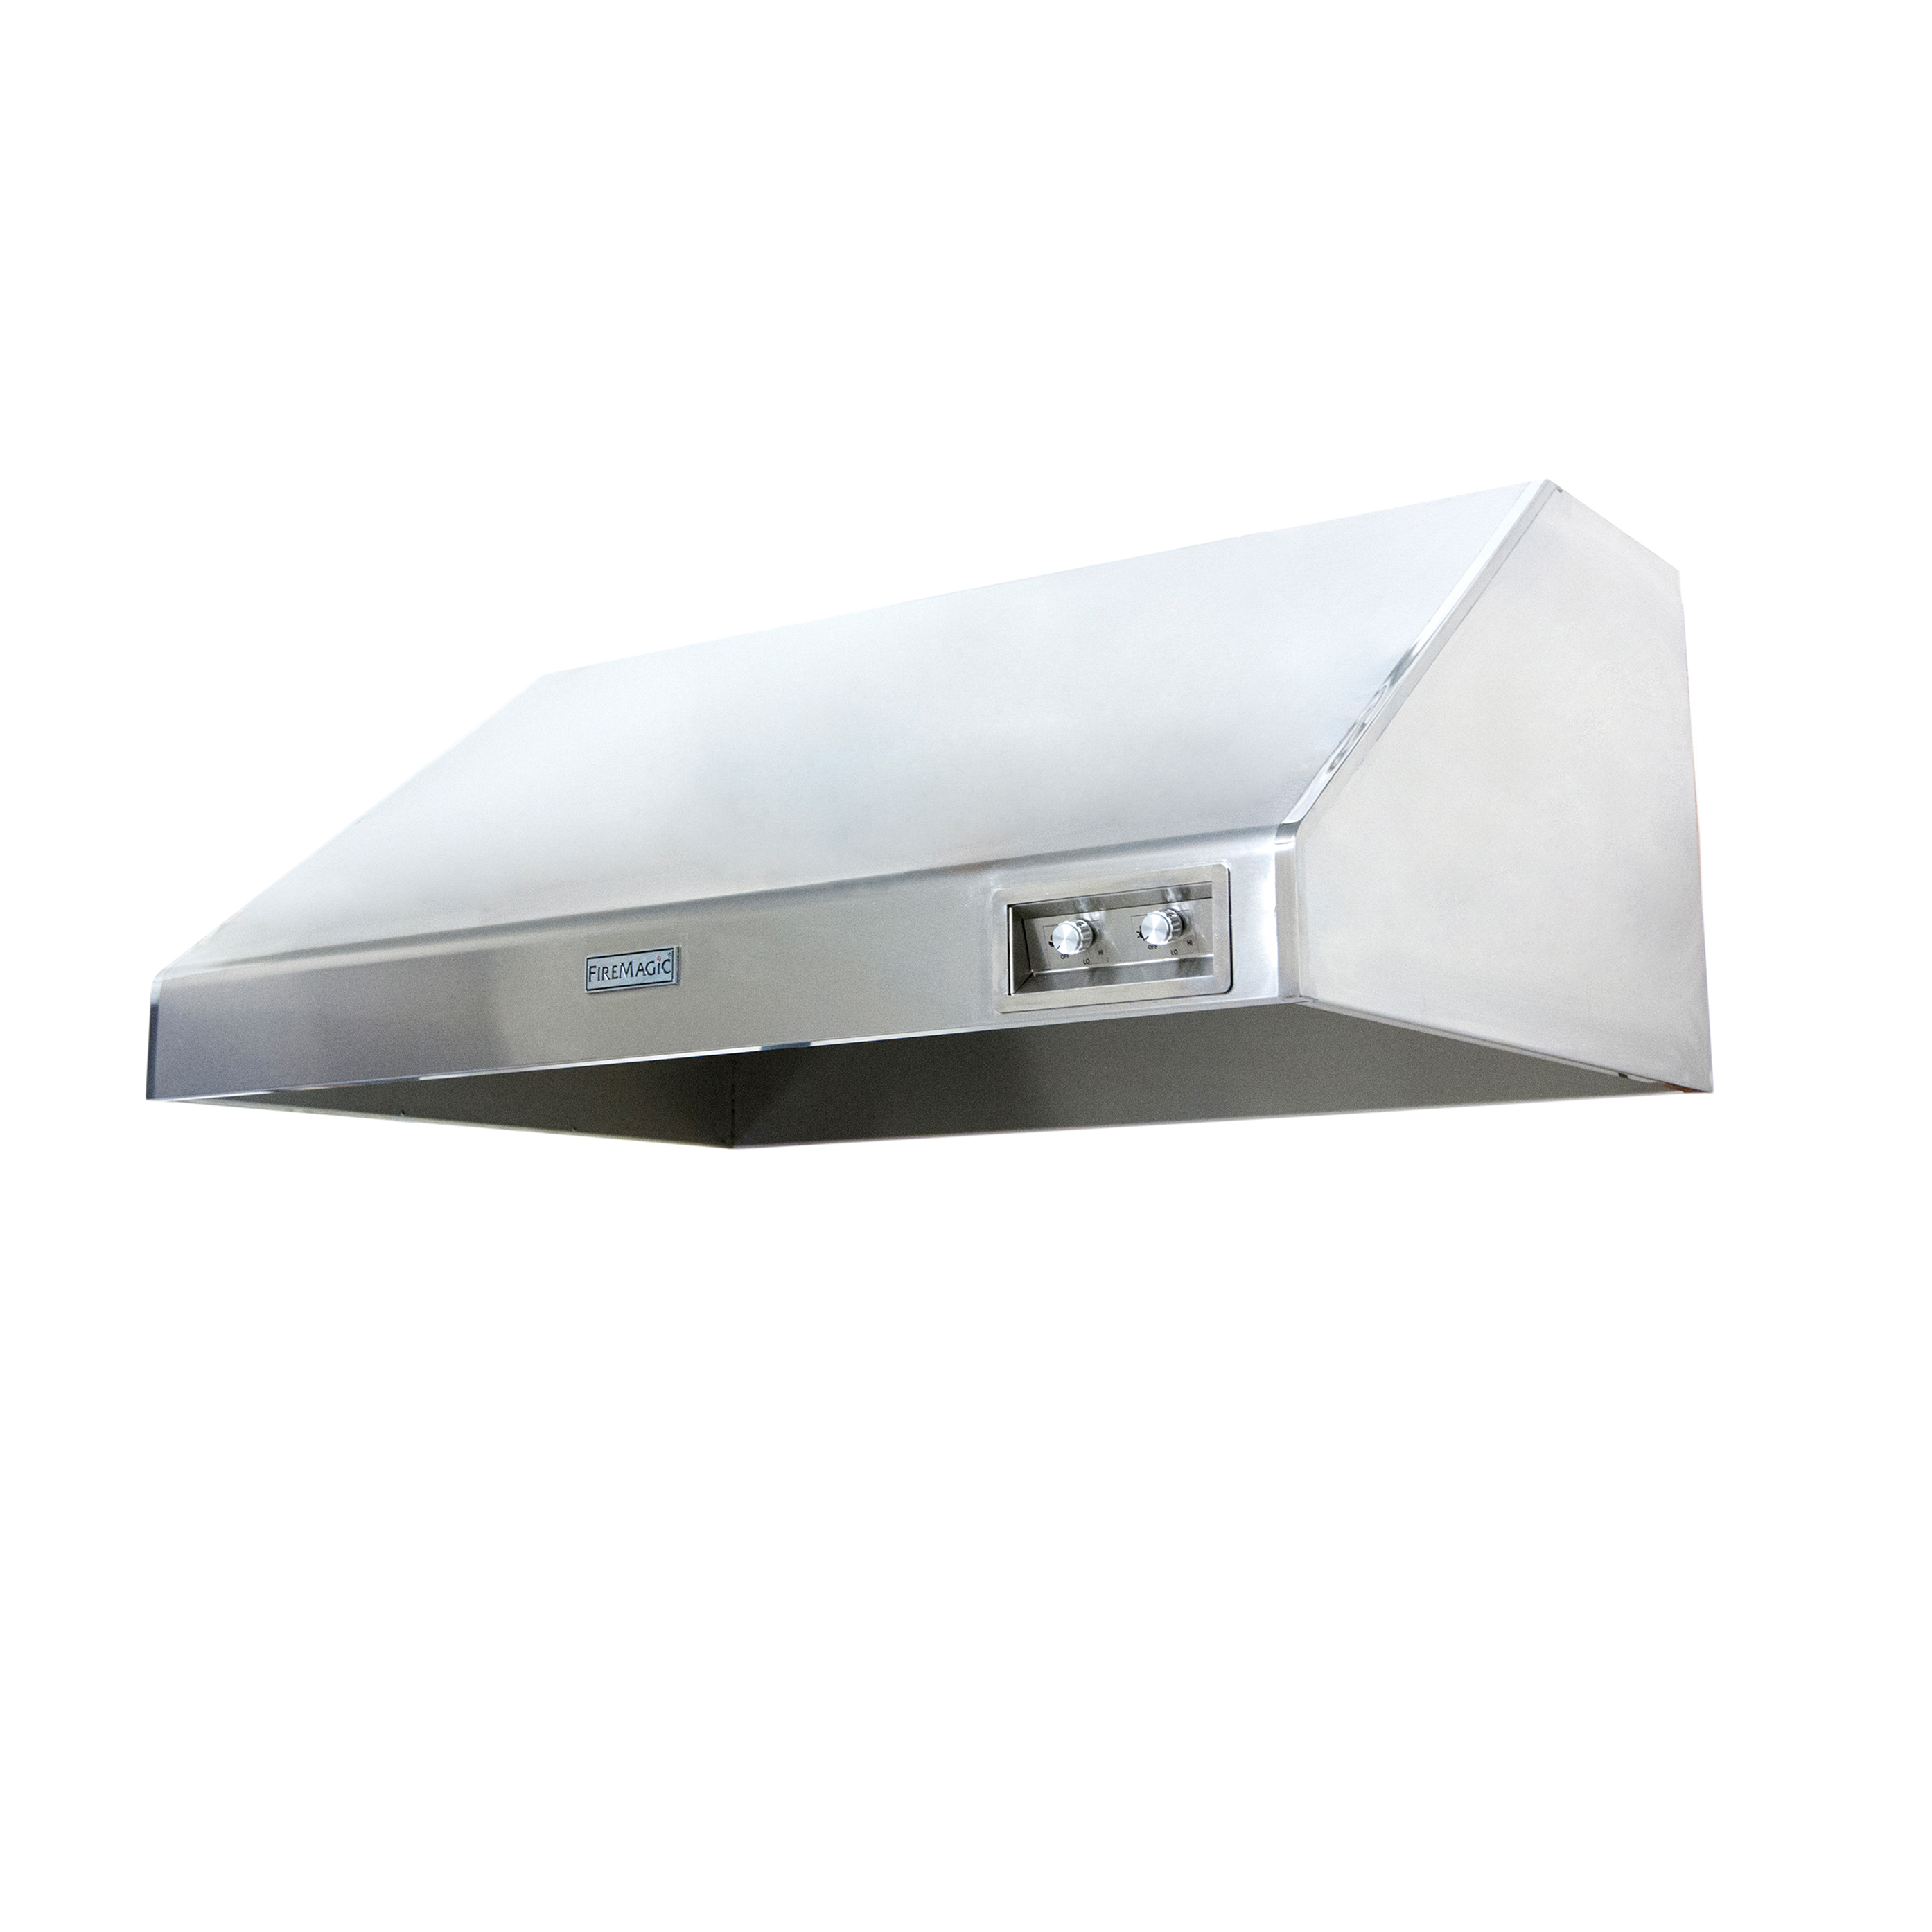 vent hood 36 inch duct cover product image